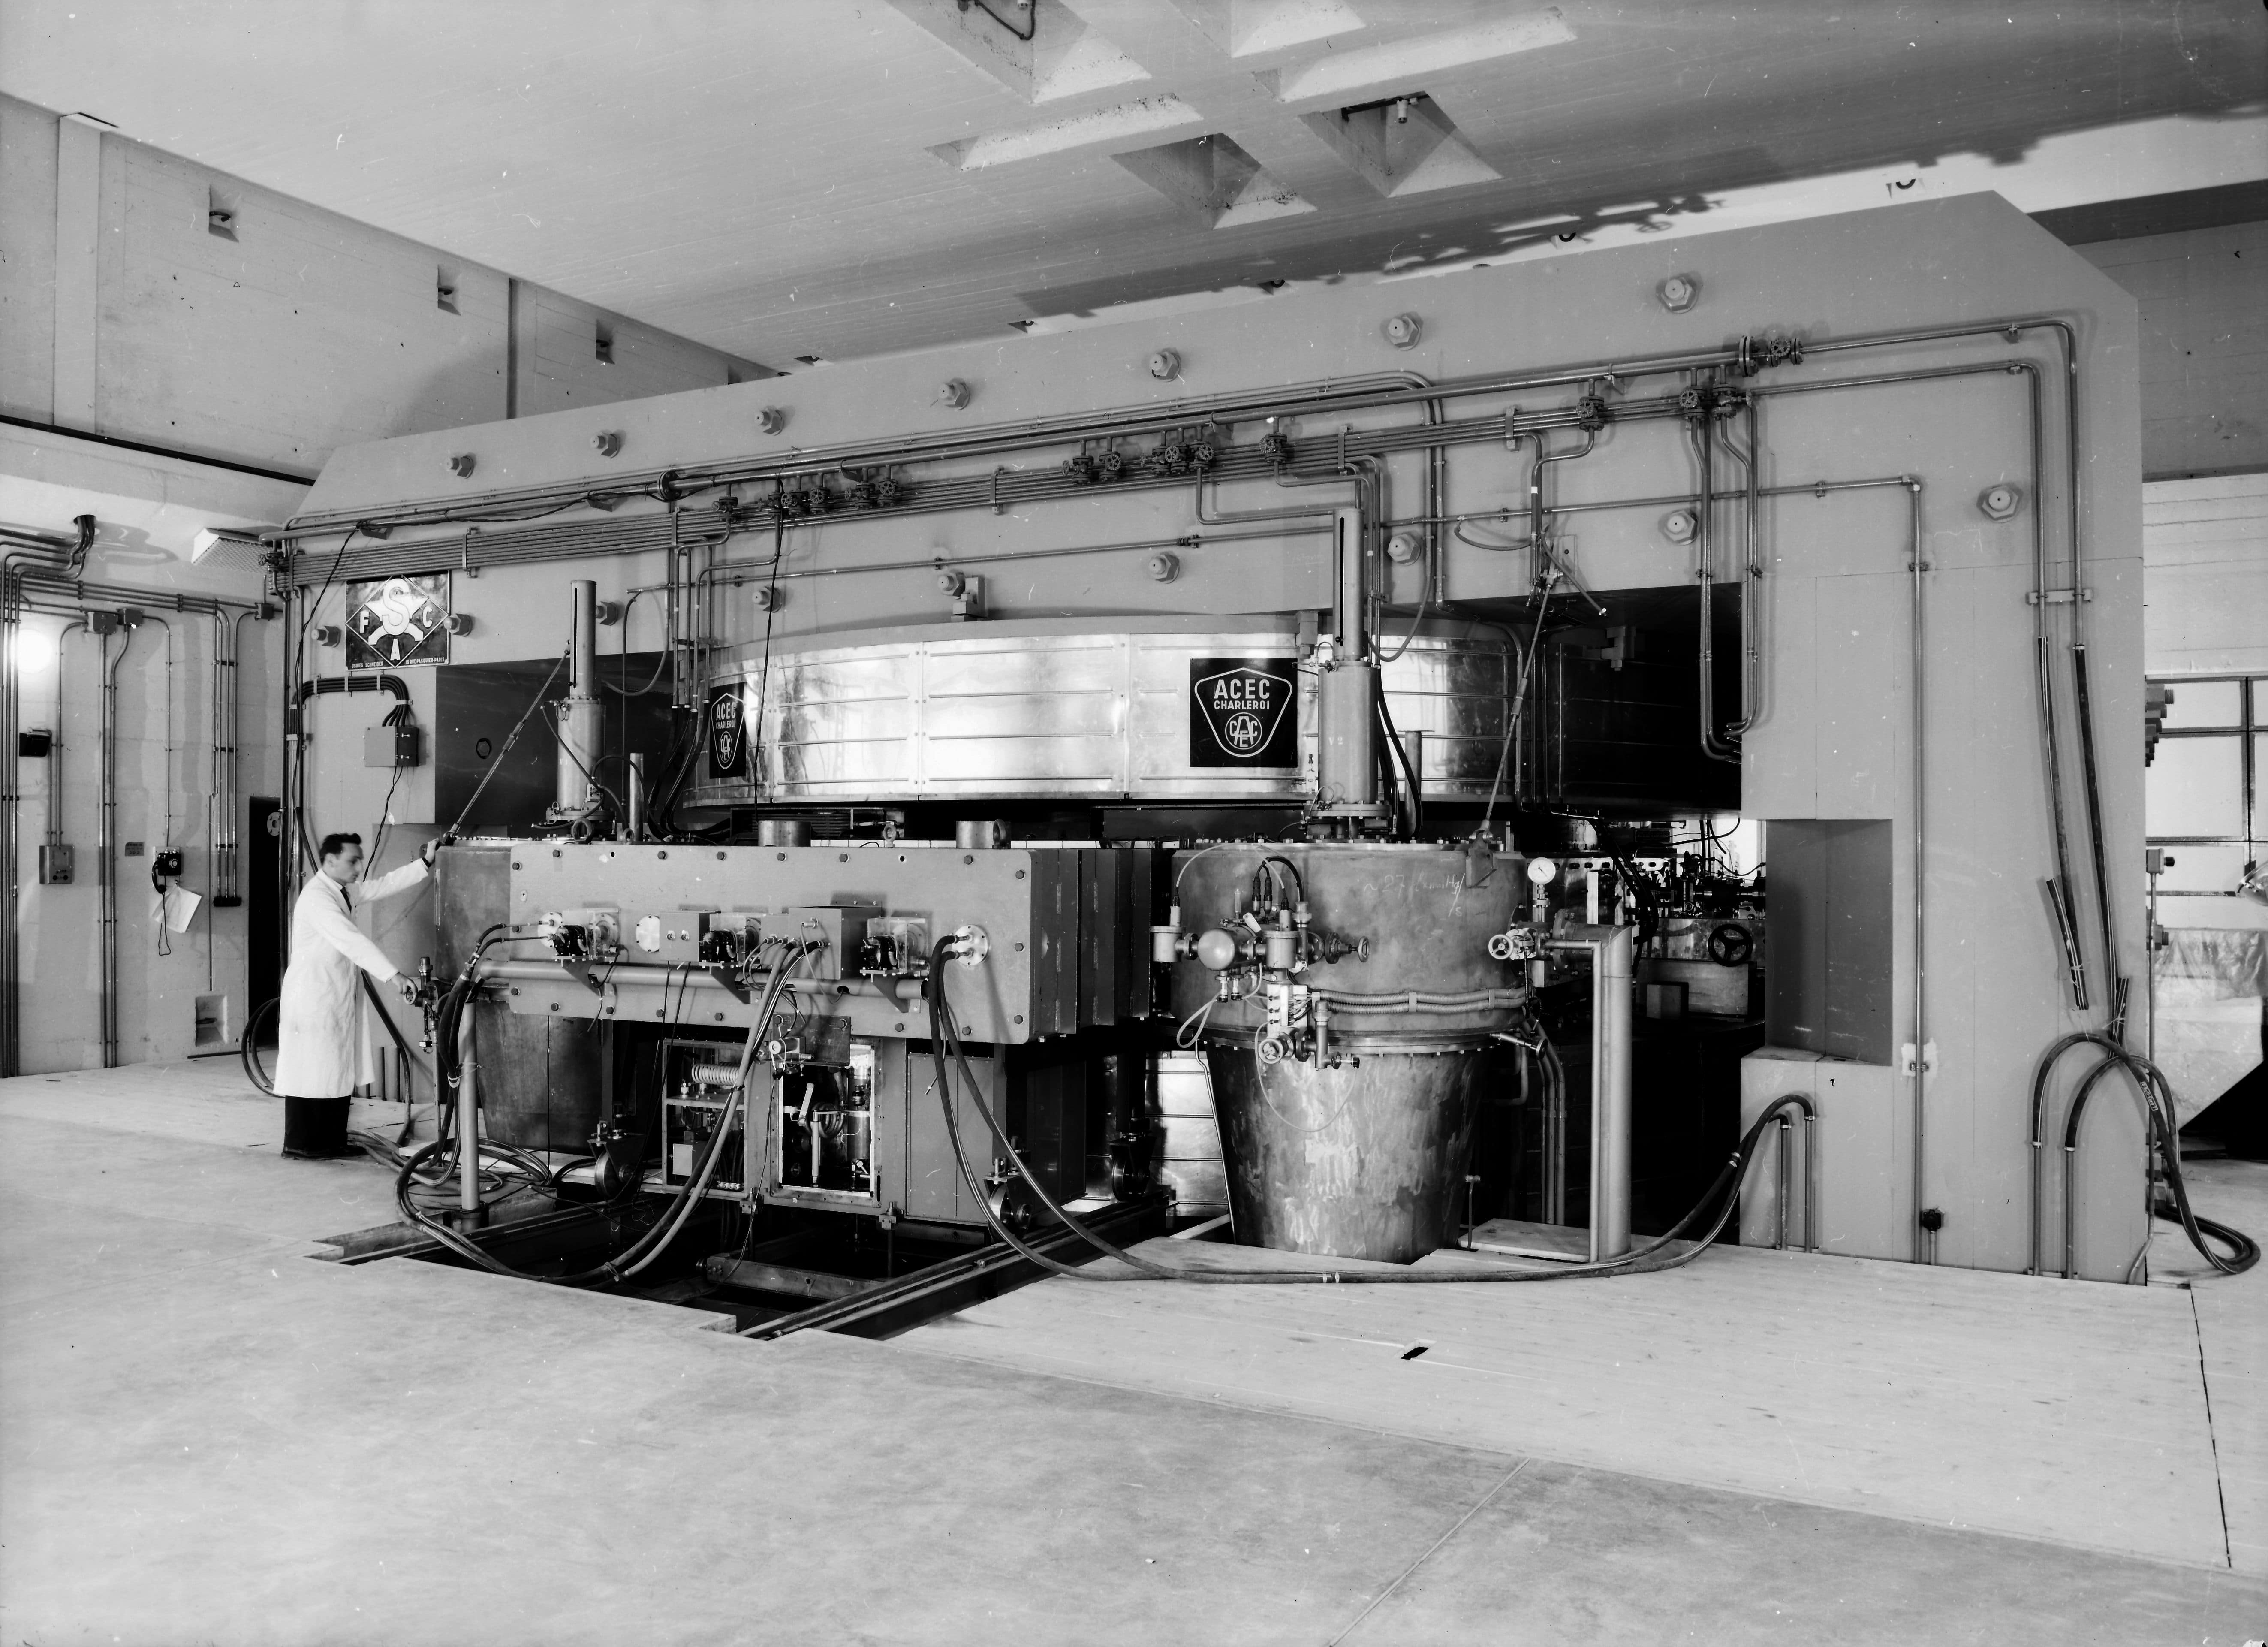 CERN's first accelerator, the Synchrocyclotron (SC), in 1957